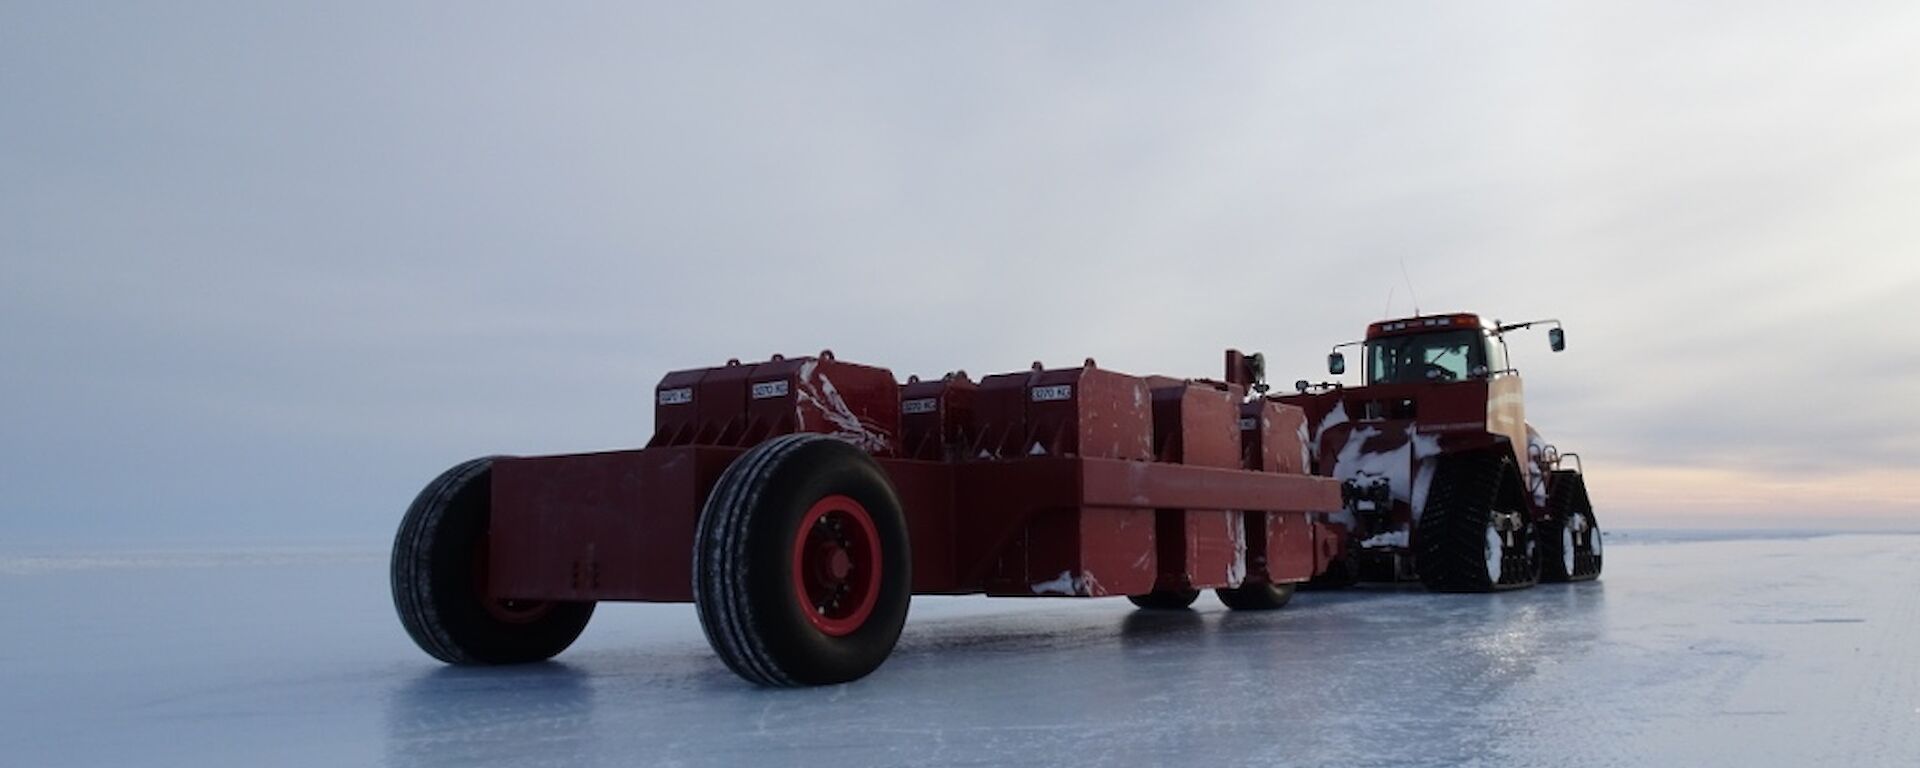 The QuadTrac tractor hooked up to the long red proof roller which is parked on the blue ice runway.